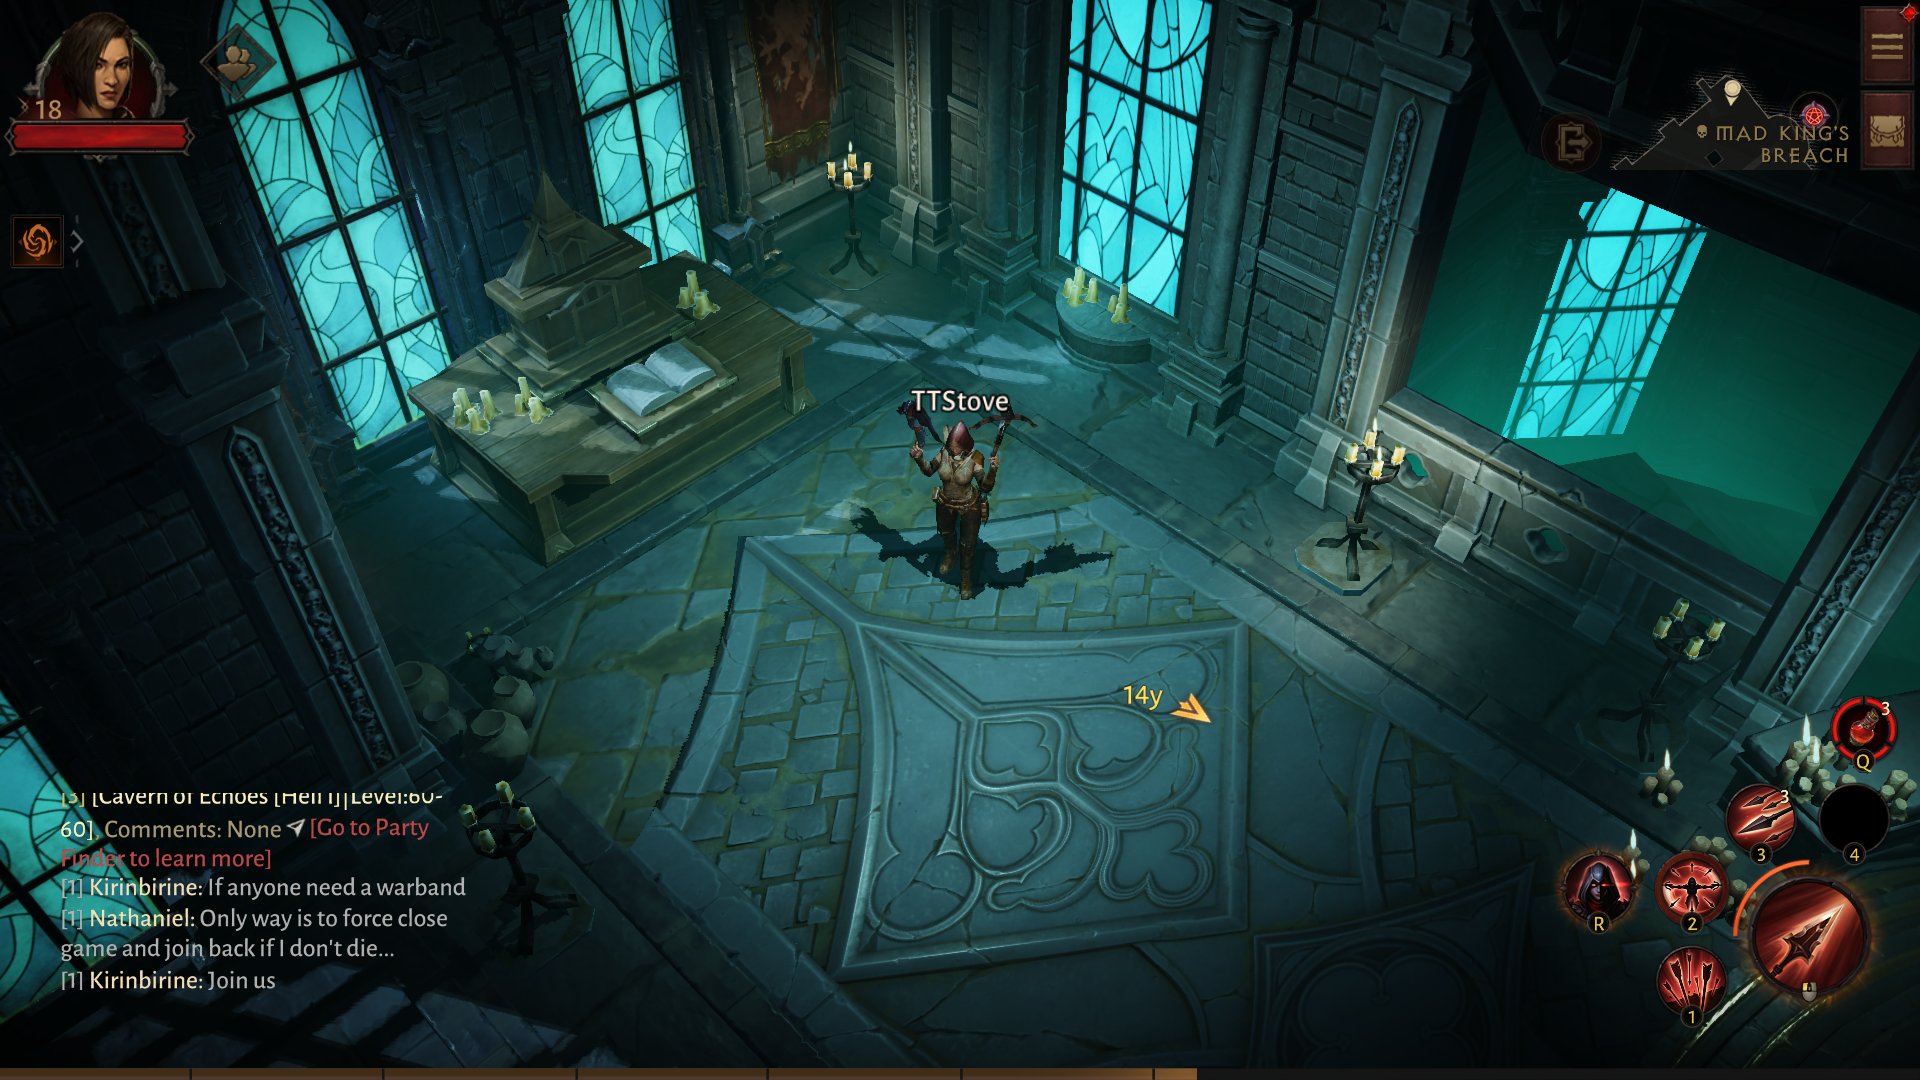 An archer stands within a castle study in Diablo Immortal, showing Medium graphics.